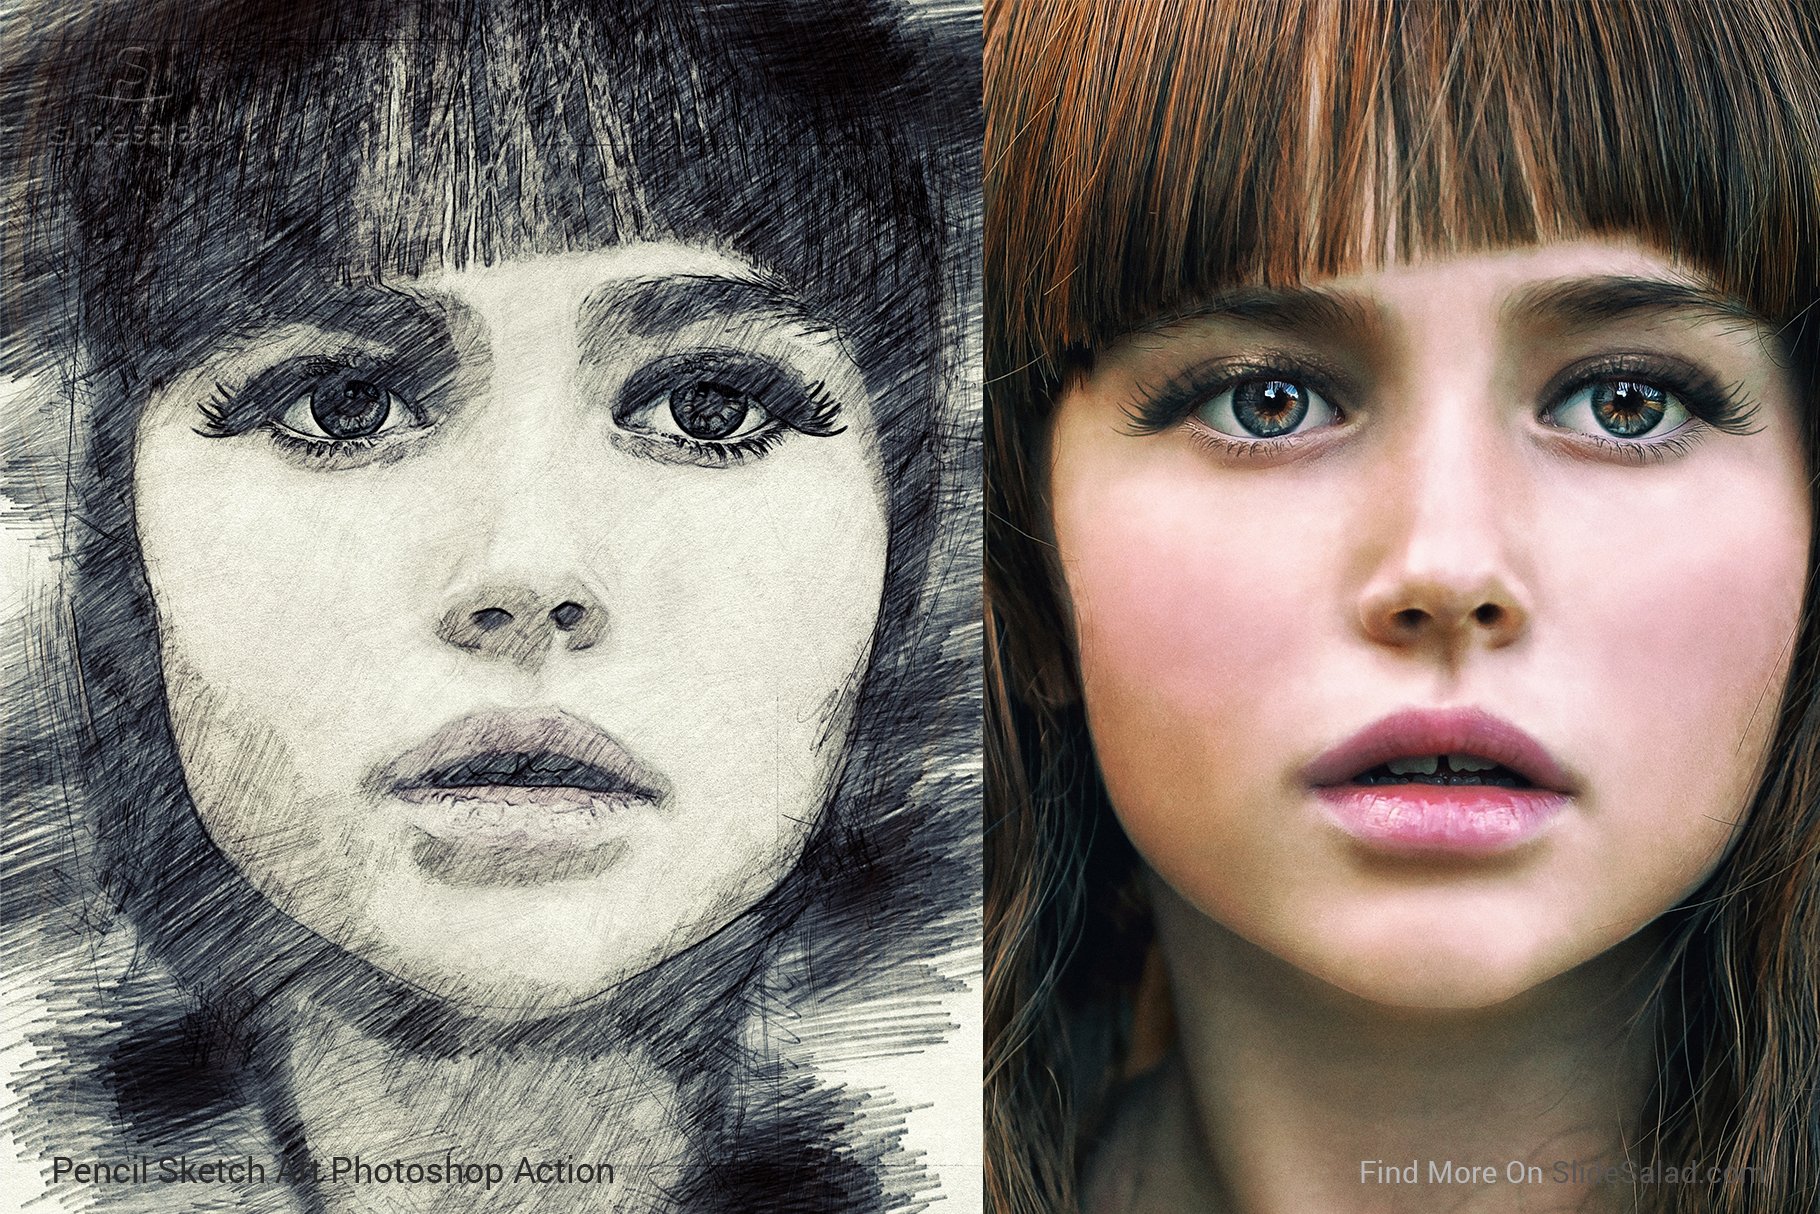 Pencil Sketch Art Photoshop Action - young girl portrait example.